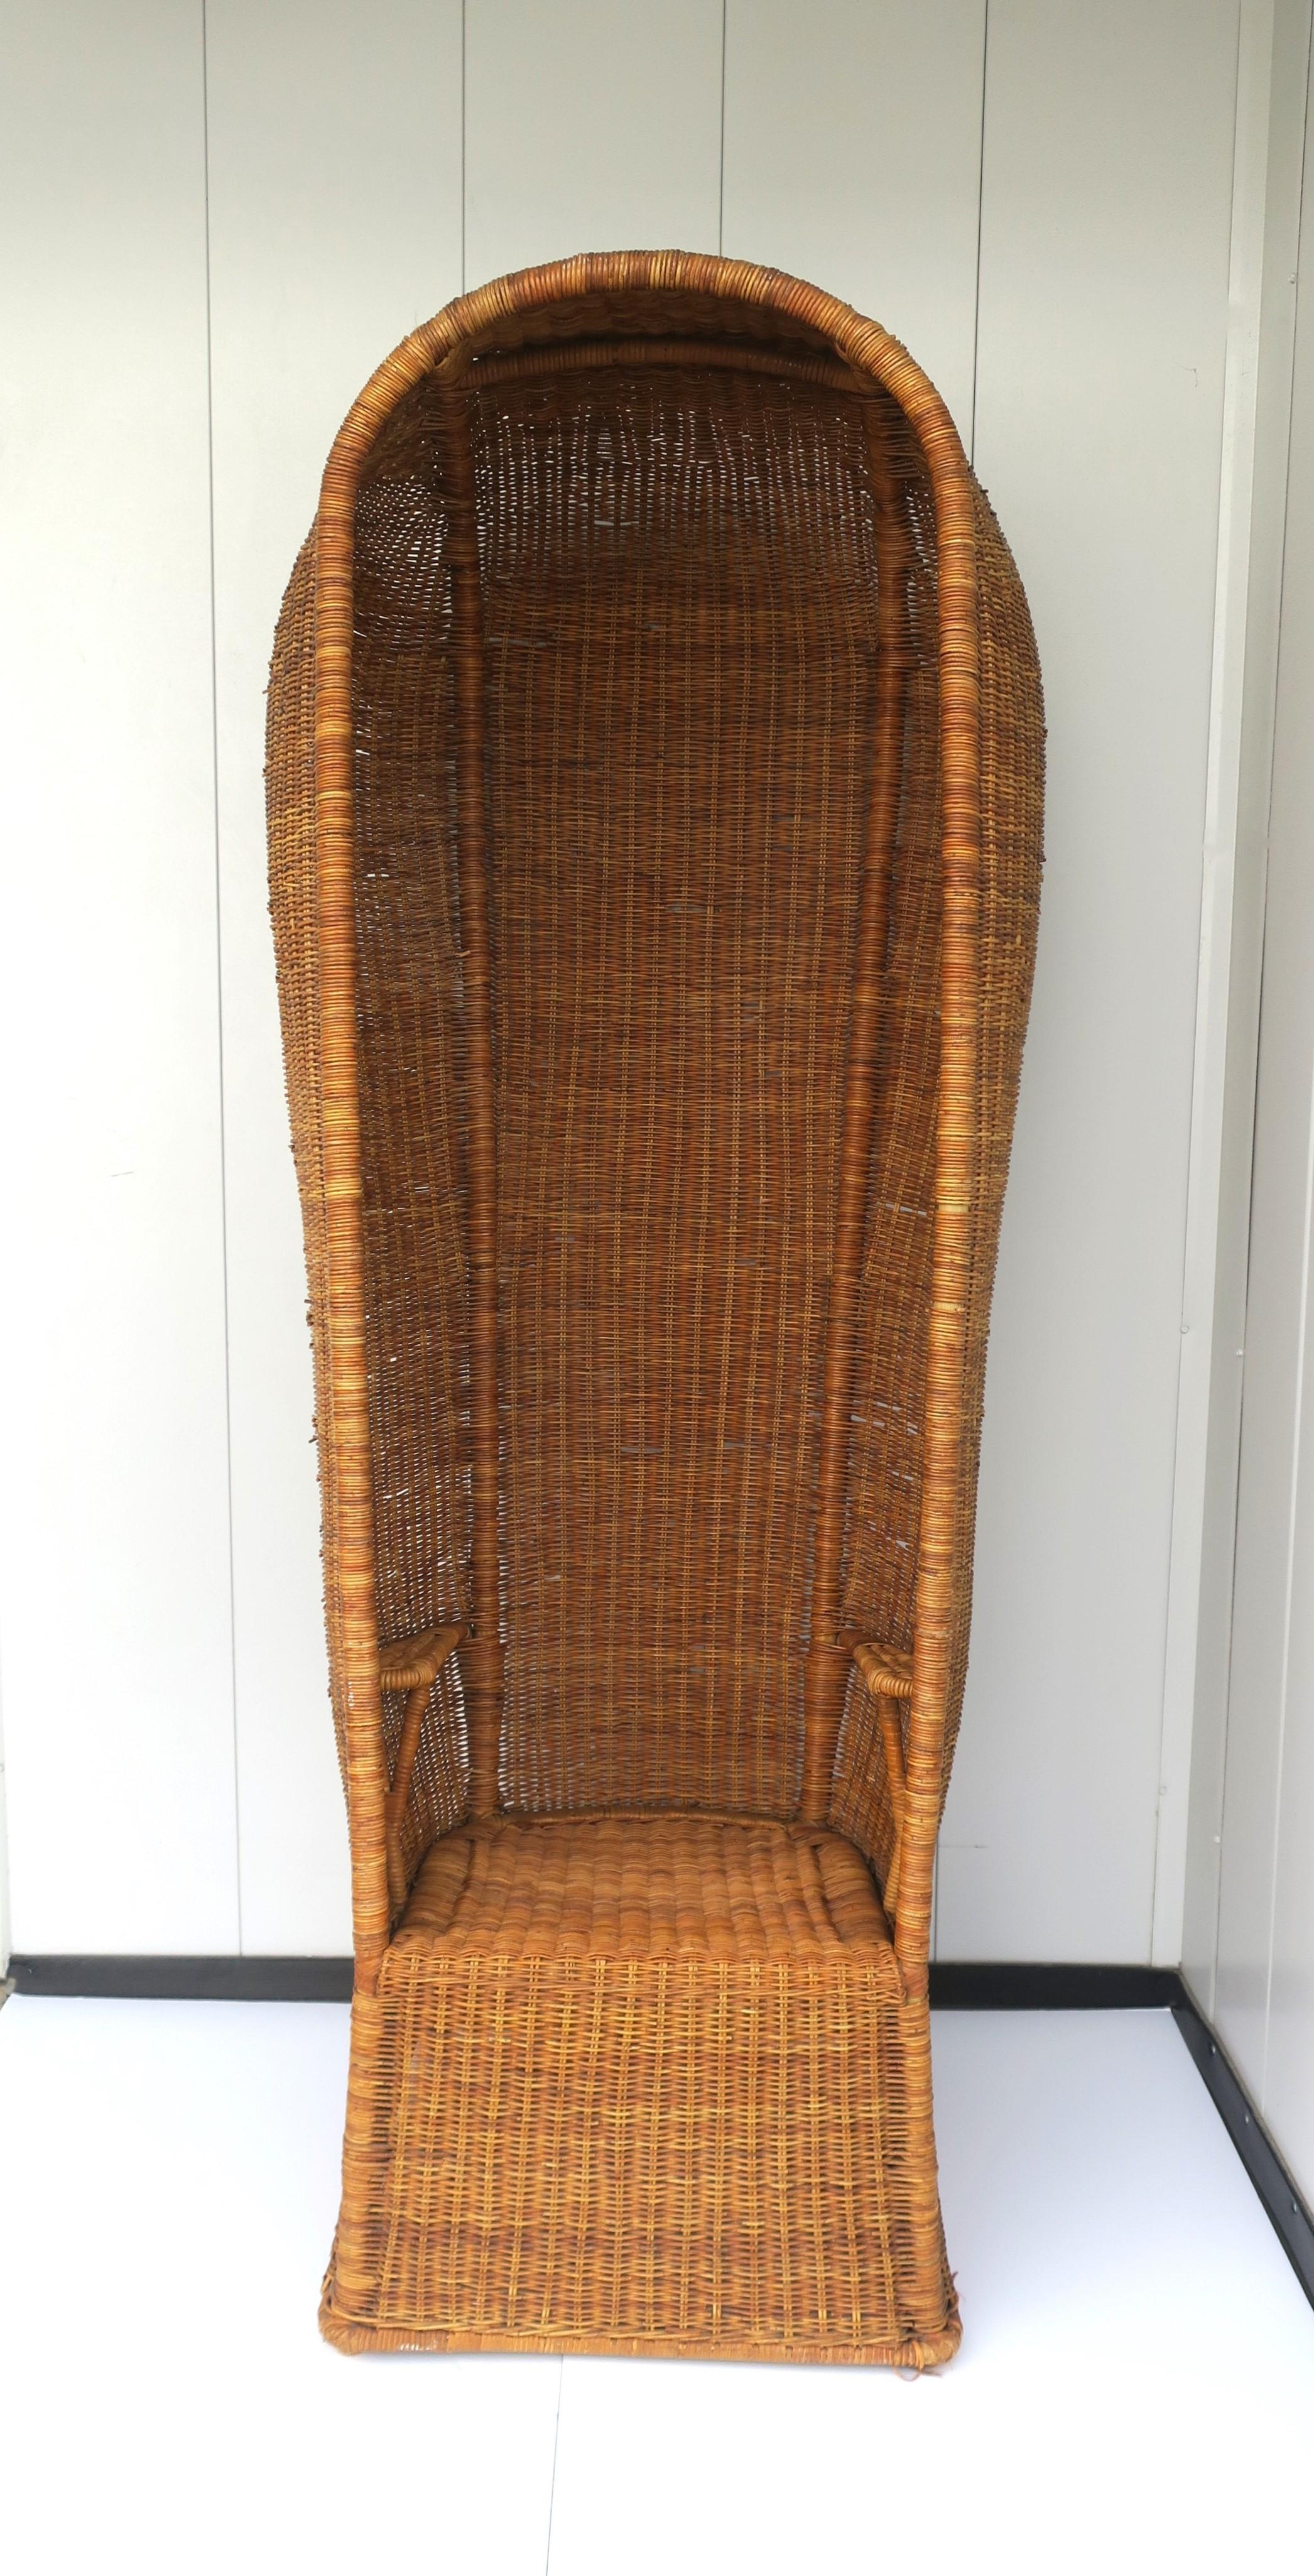 A beautiful and rare wicker hooded canopy chair, Bohemian, circa 1960s, 1970s. Chair is entirely wicker, with wicker arm rests, finished with a simple round seat cushion (seat cushion is removable as shown in images.) This chair makes an impression.